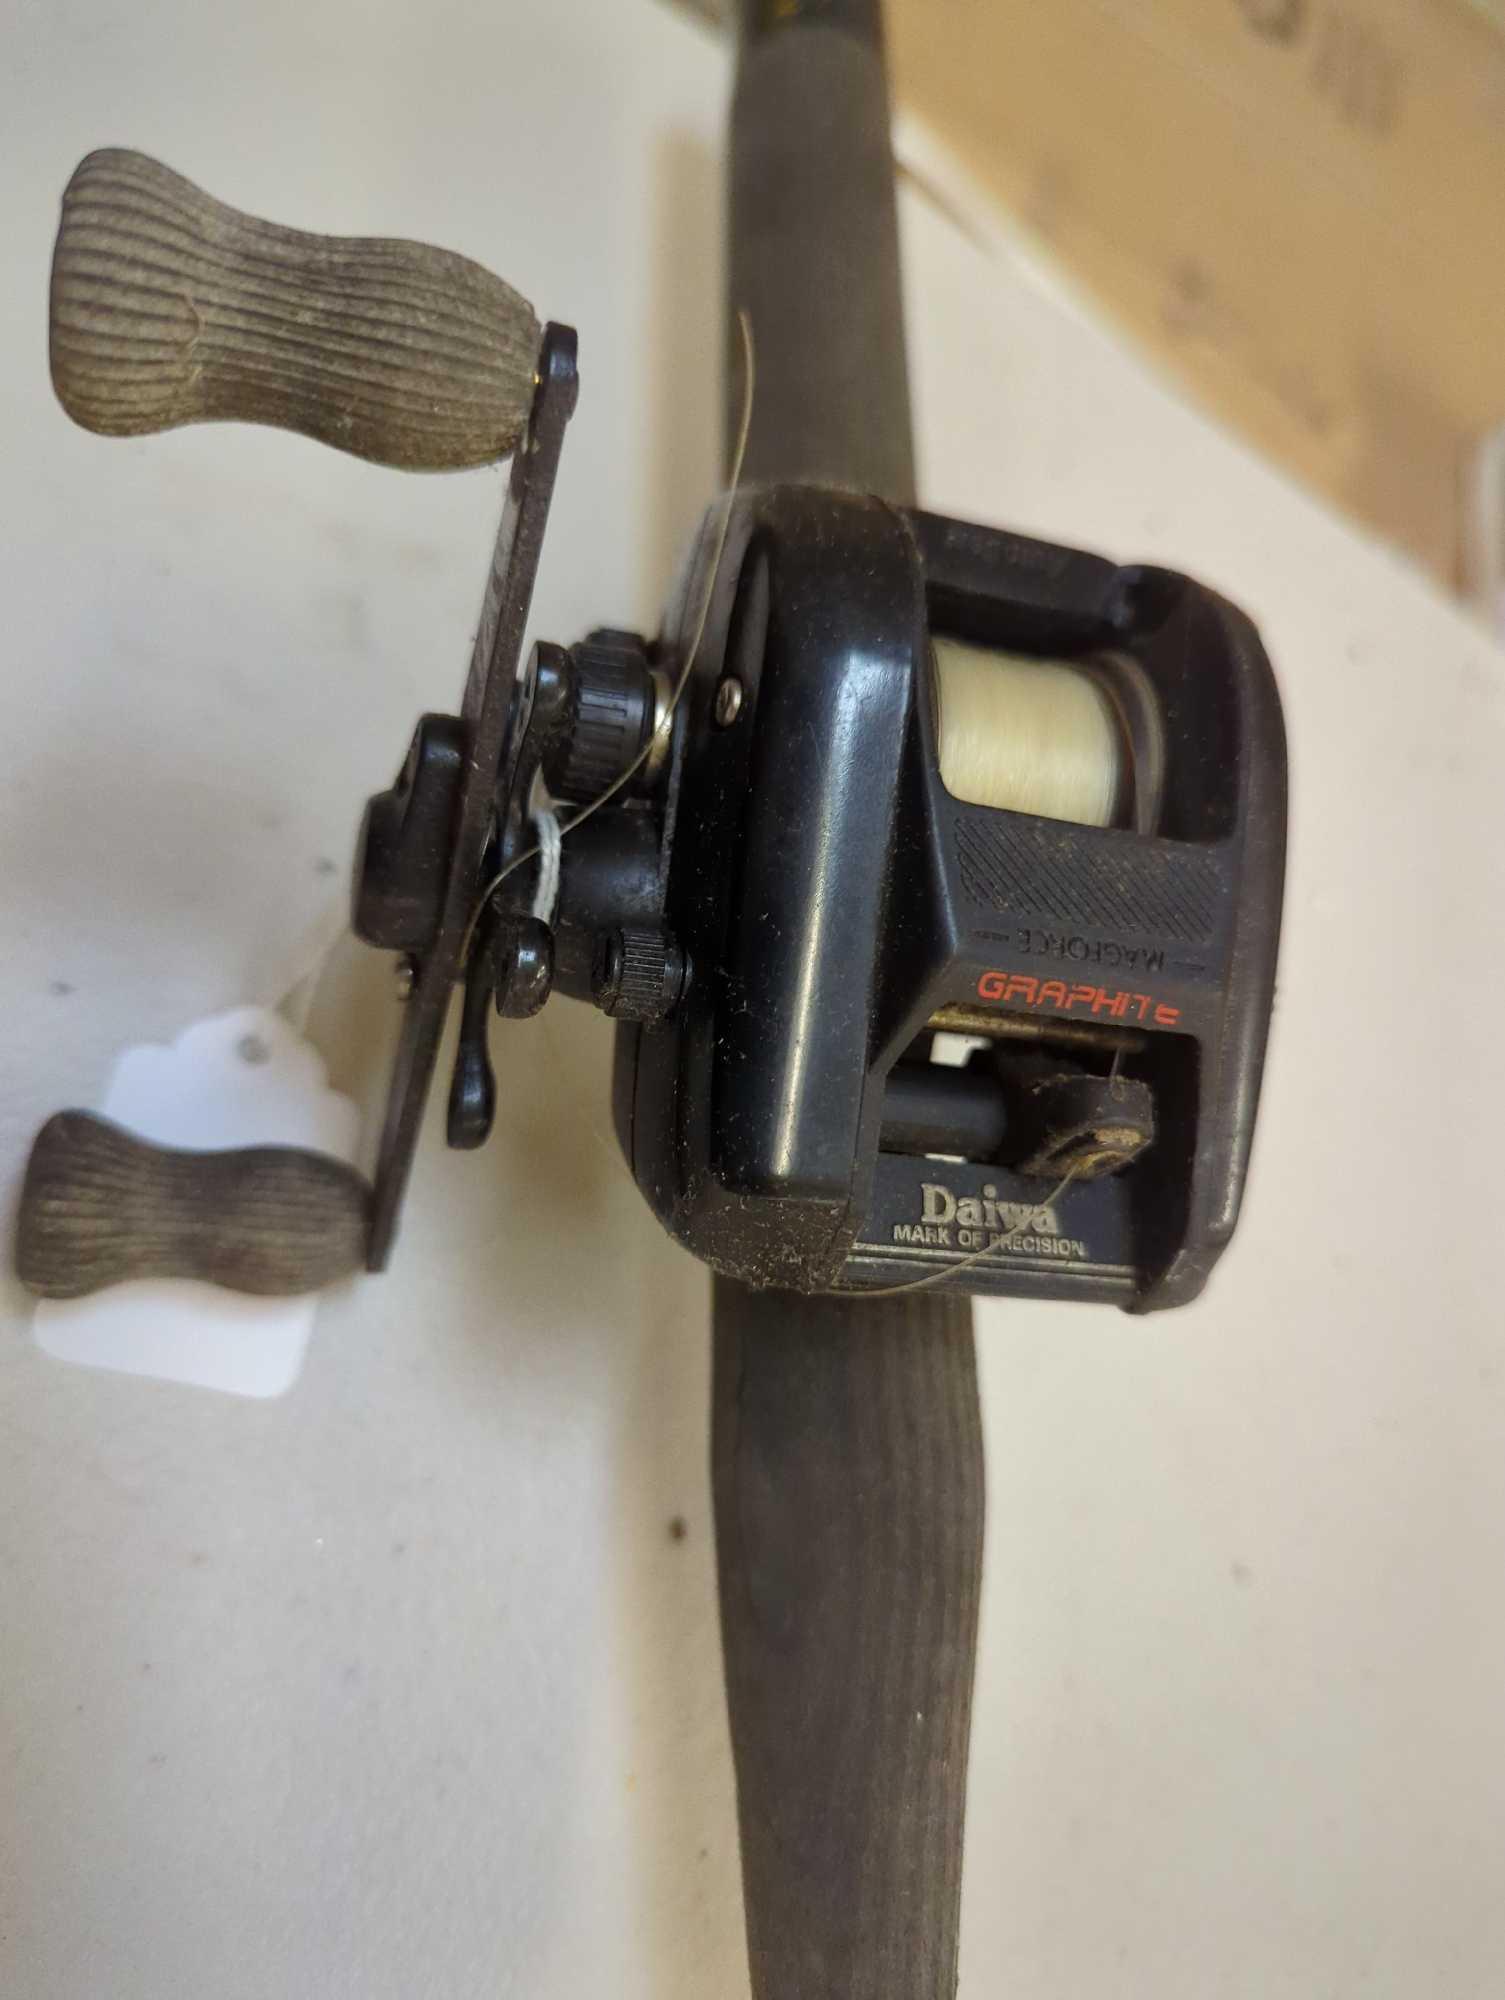 Black 6' fishing rod with Daiwa fishing reel. Comes as is shown in photos. Appears to be used.